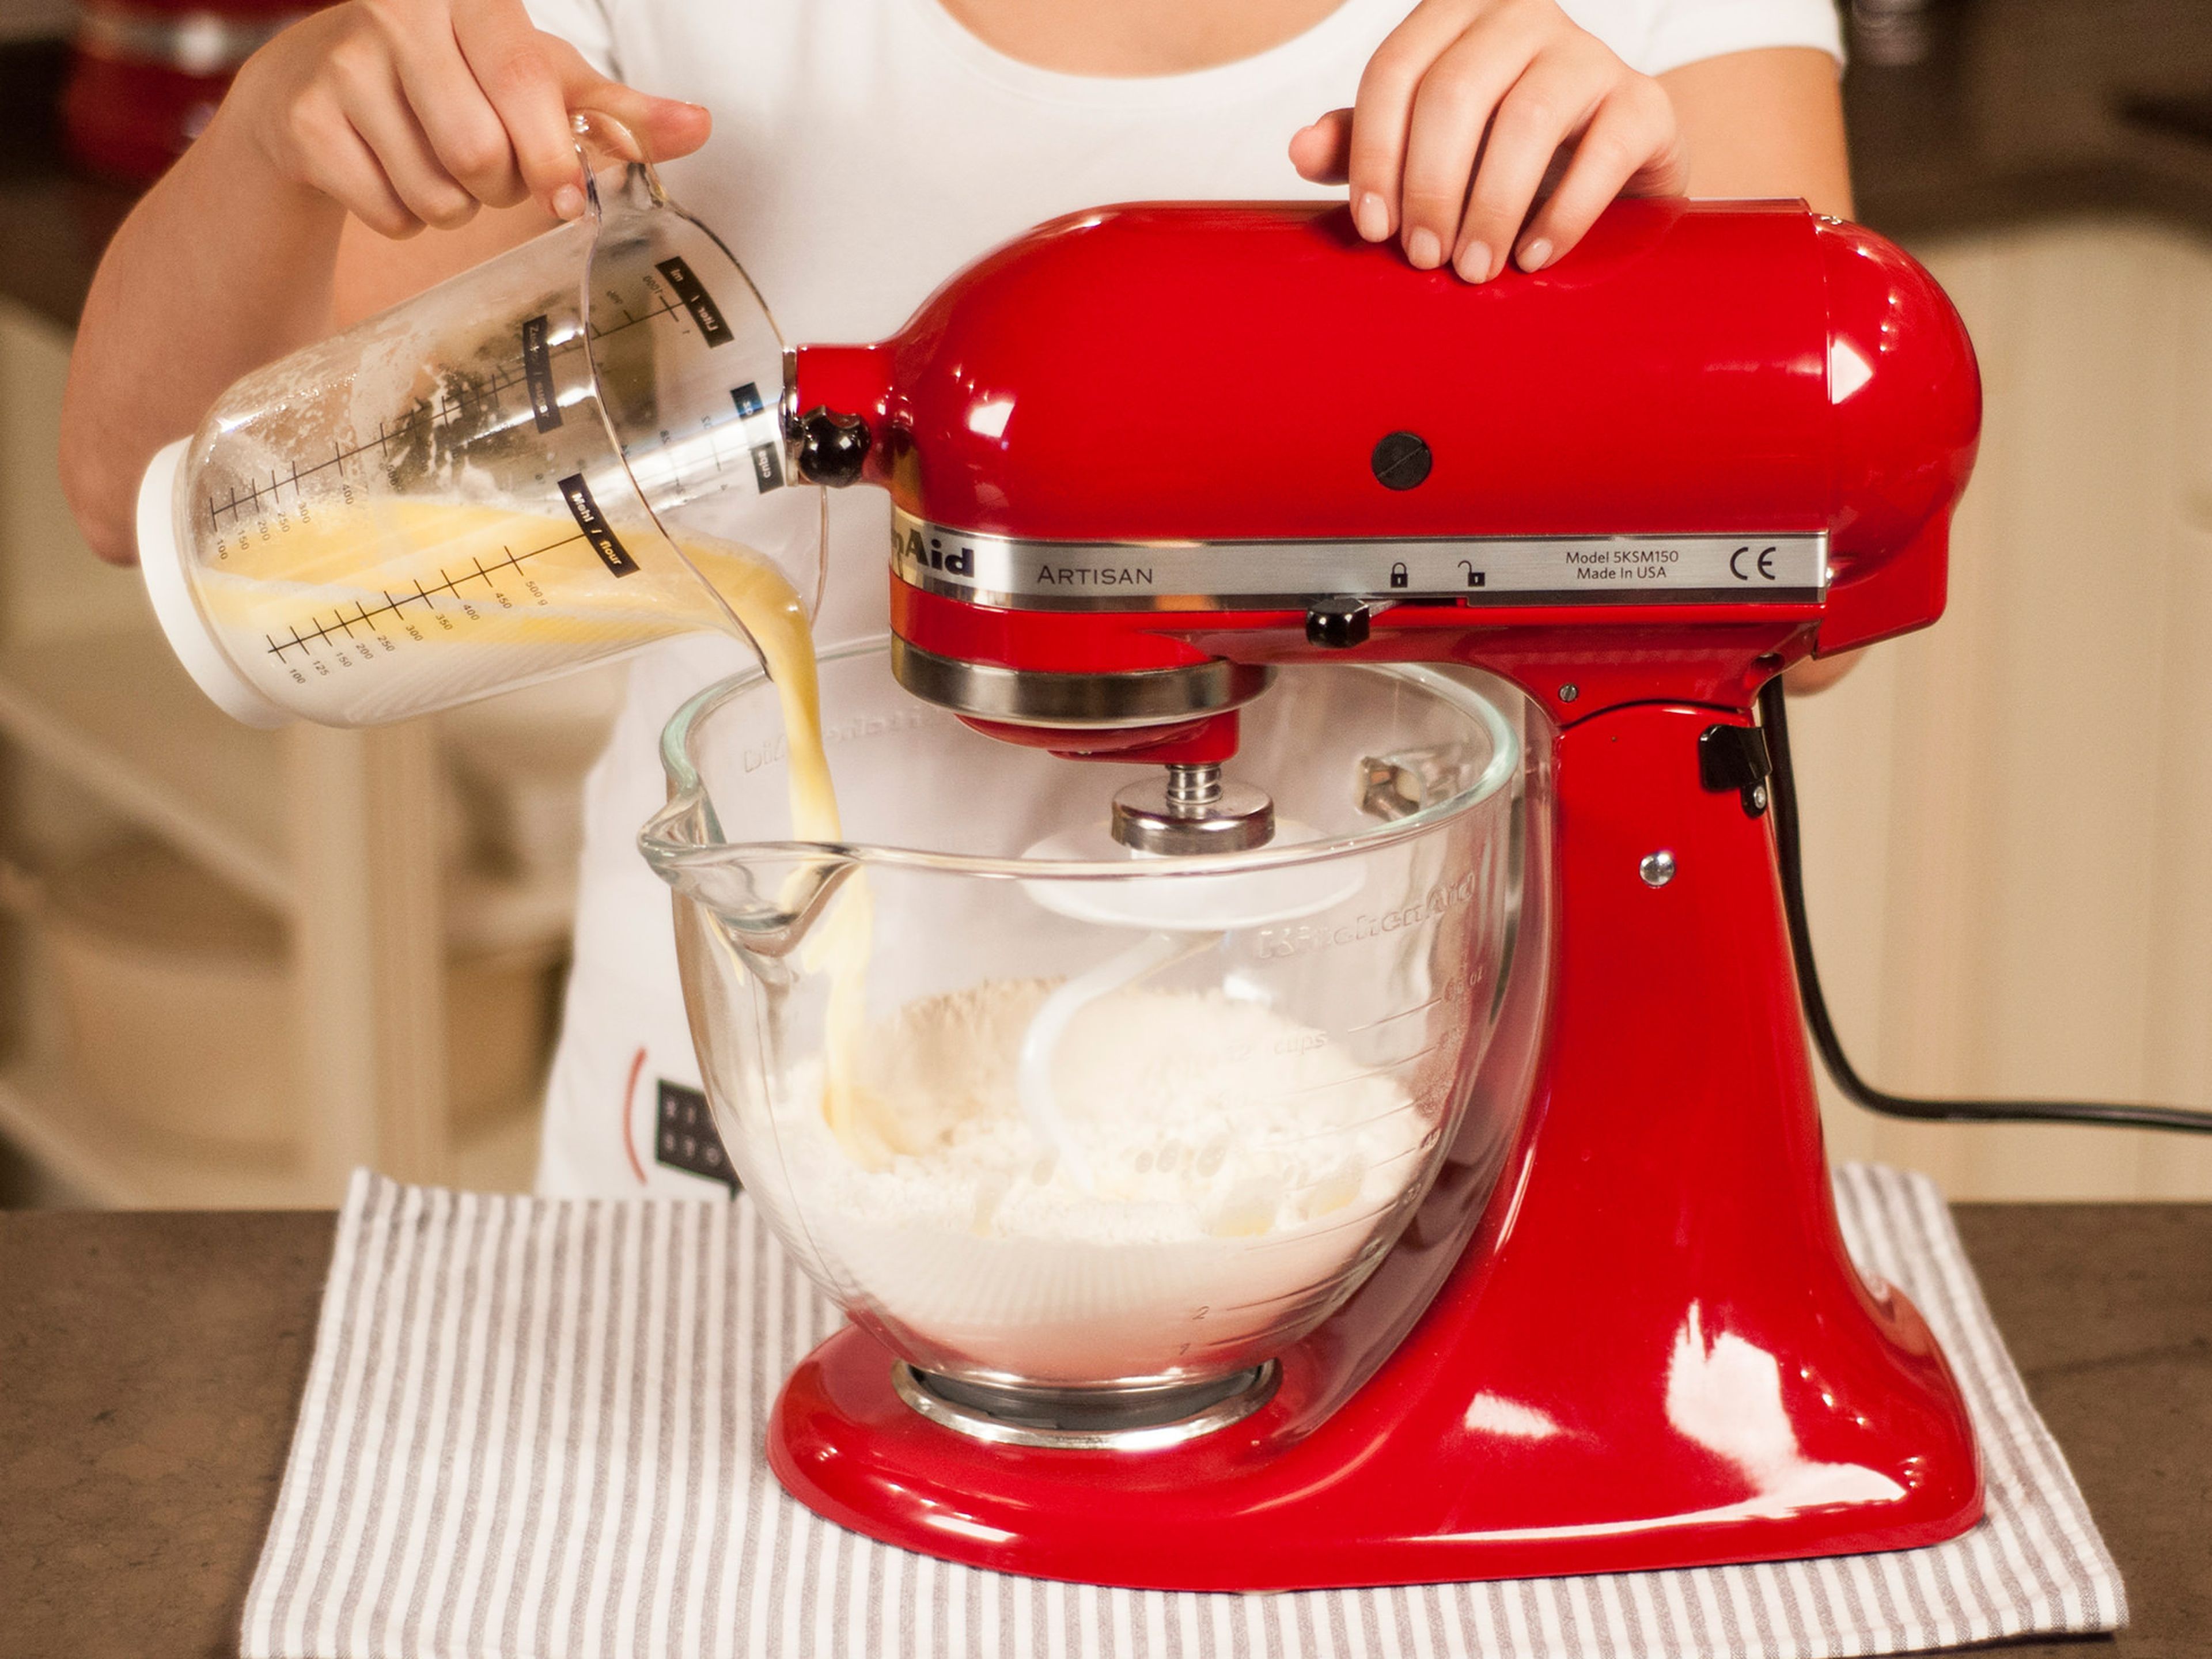 In a standing mixer, or using a hand mixer with dough hooks, mix flour and warm milk mixture for approx. 6 - 10 min. until a smooth dough forms.